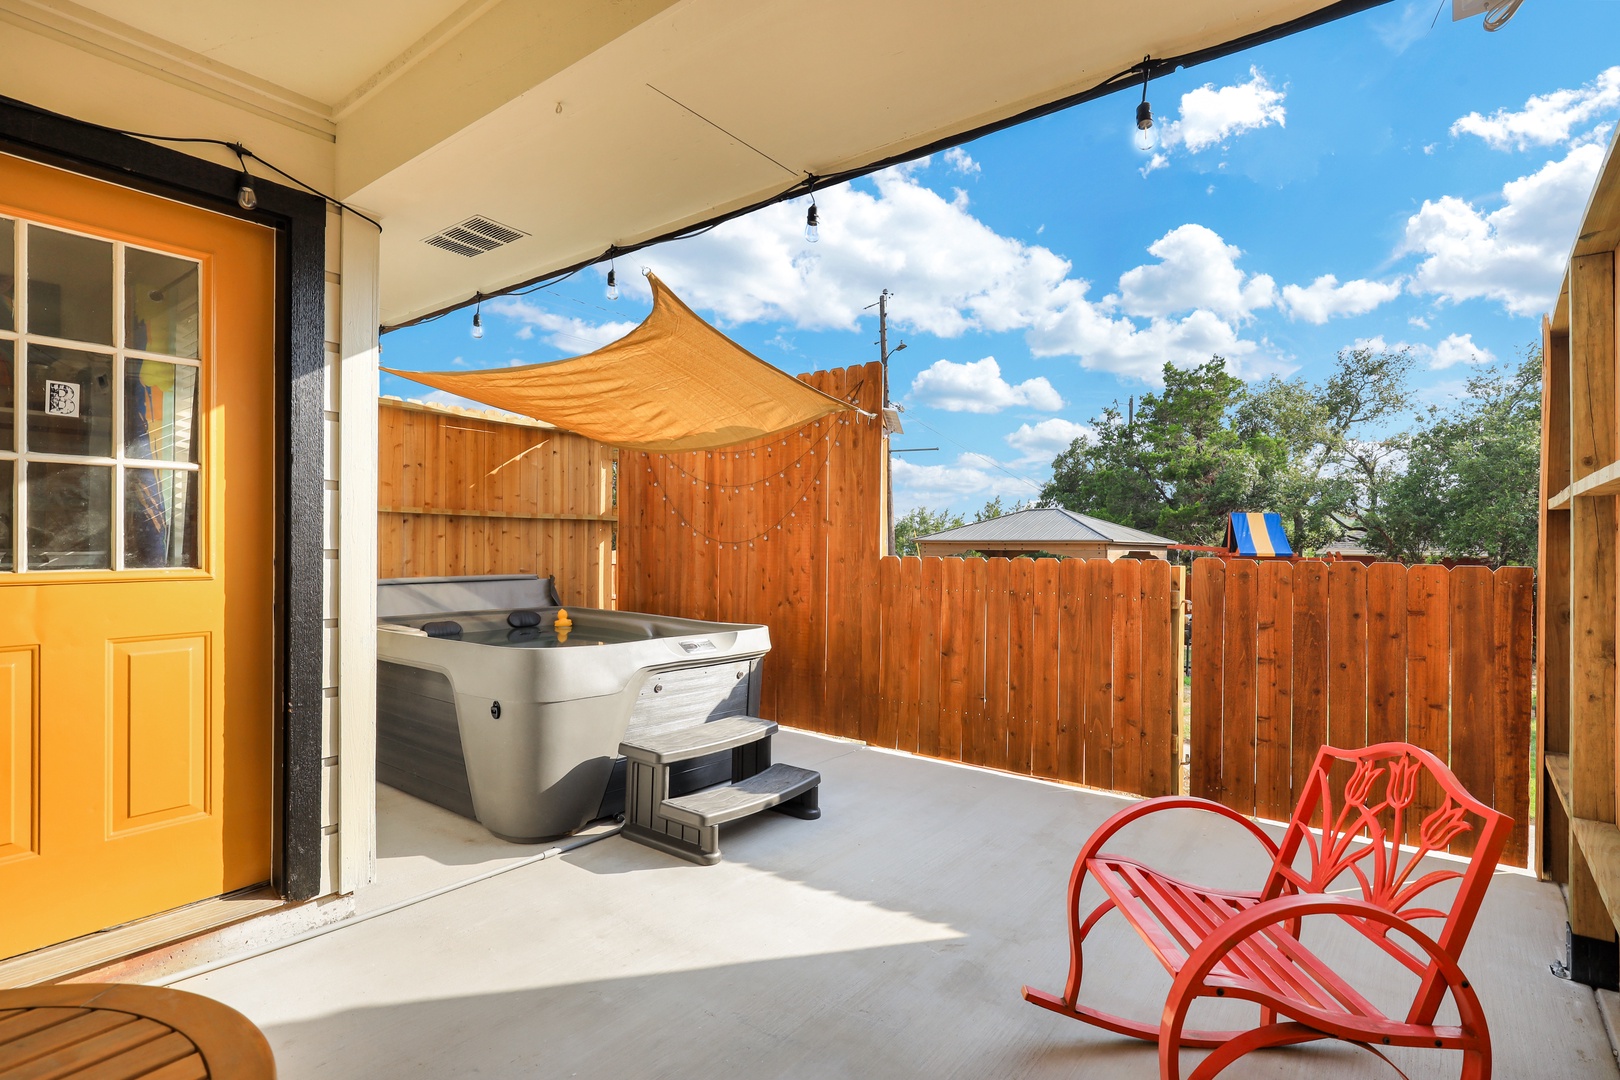 Lounge with a cocktail or soak in the private hot tub on the patio